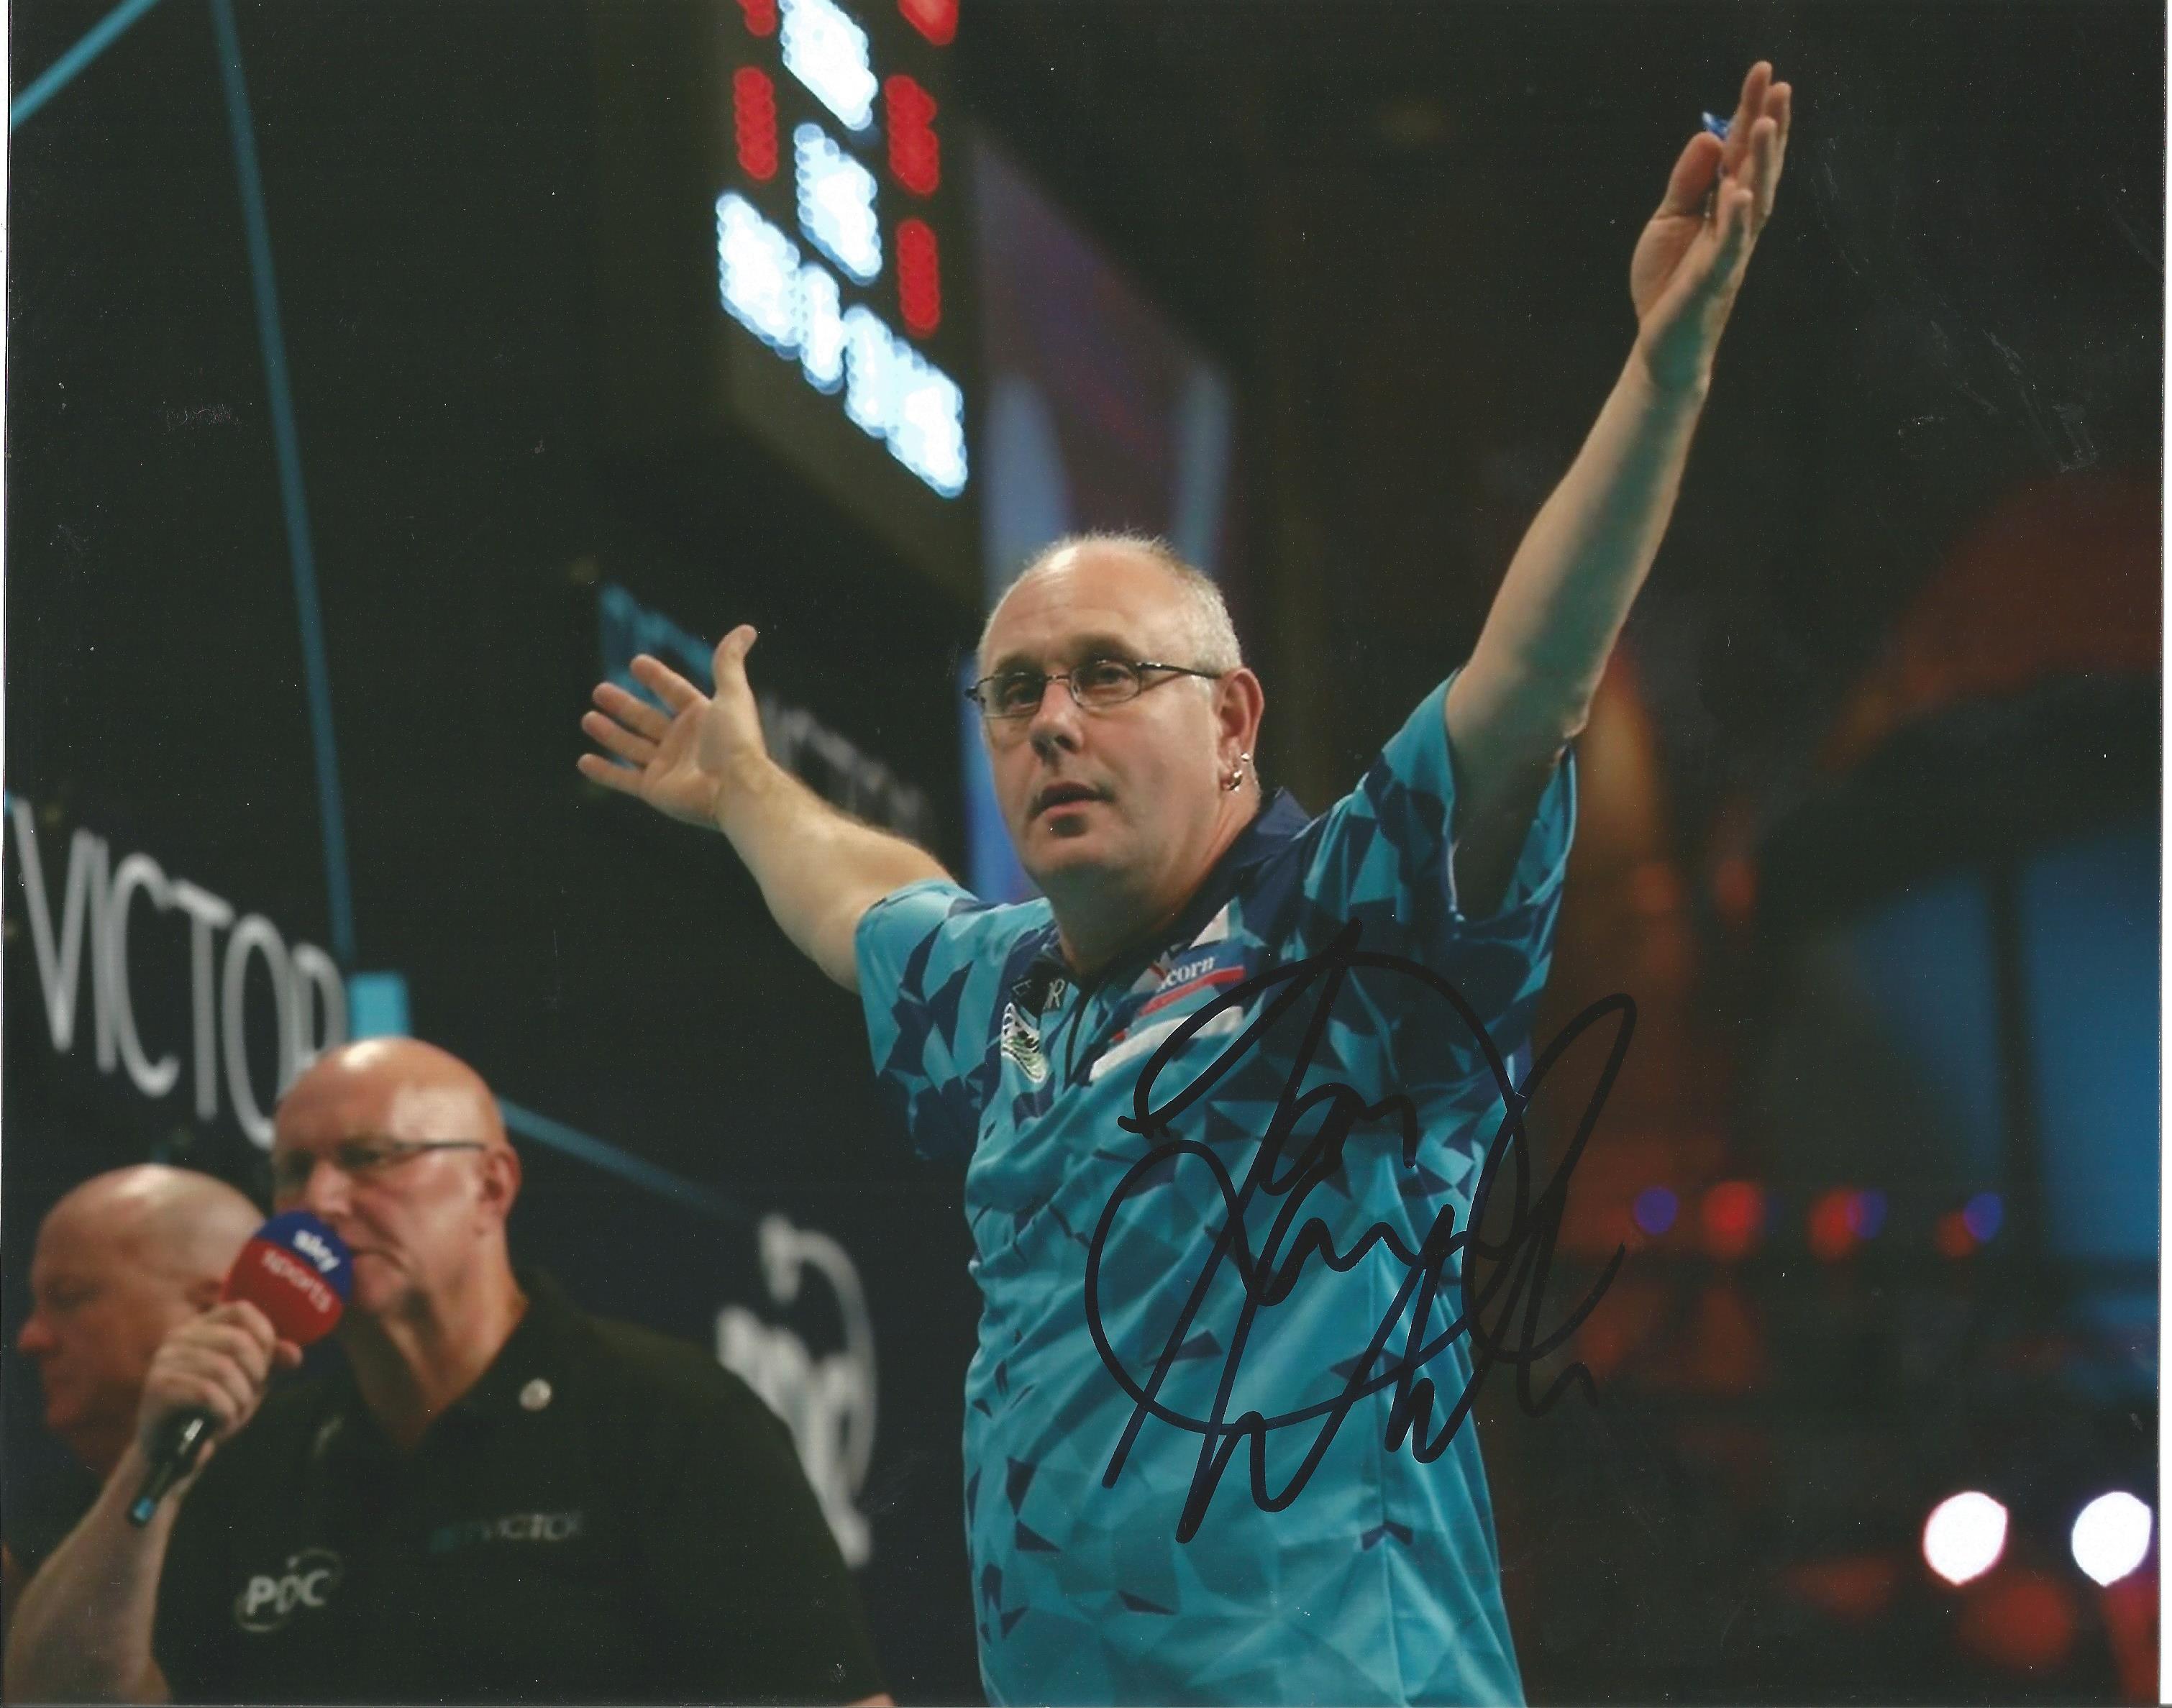 Ian White Signed Darts 8x10 Photo. Good Condition. All autographs are genuine hand signed and come